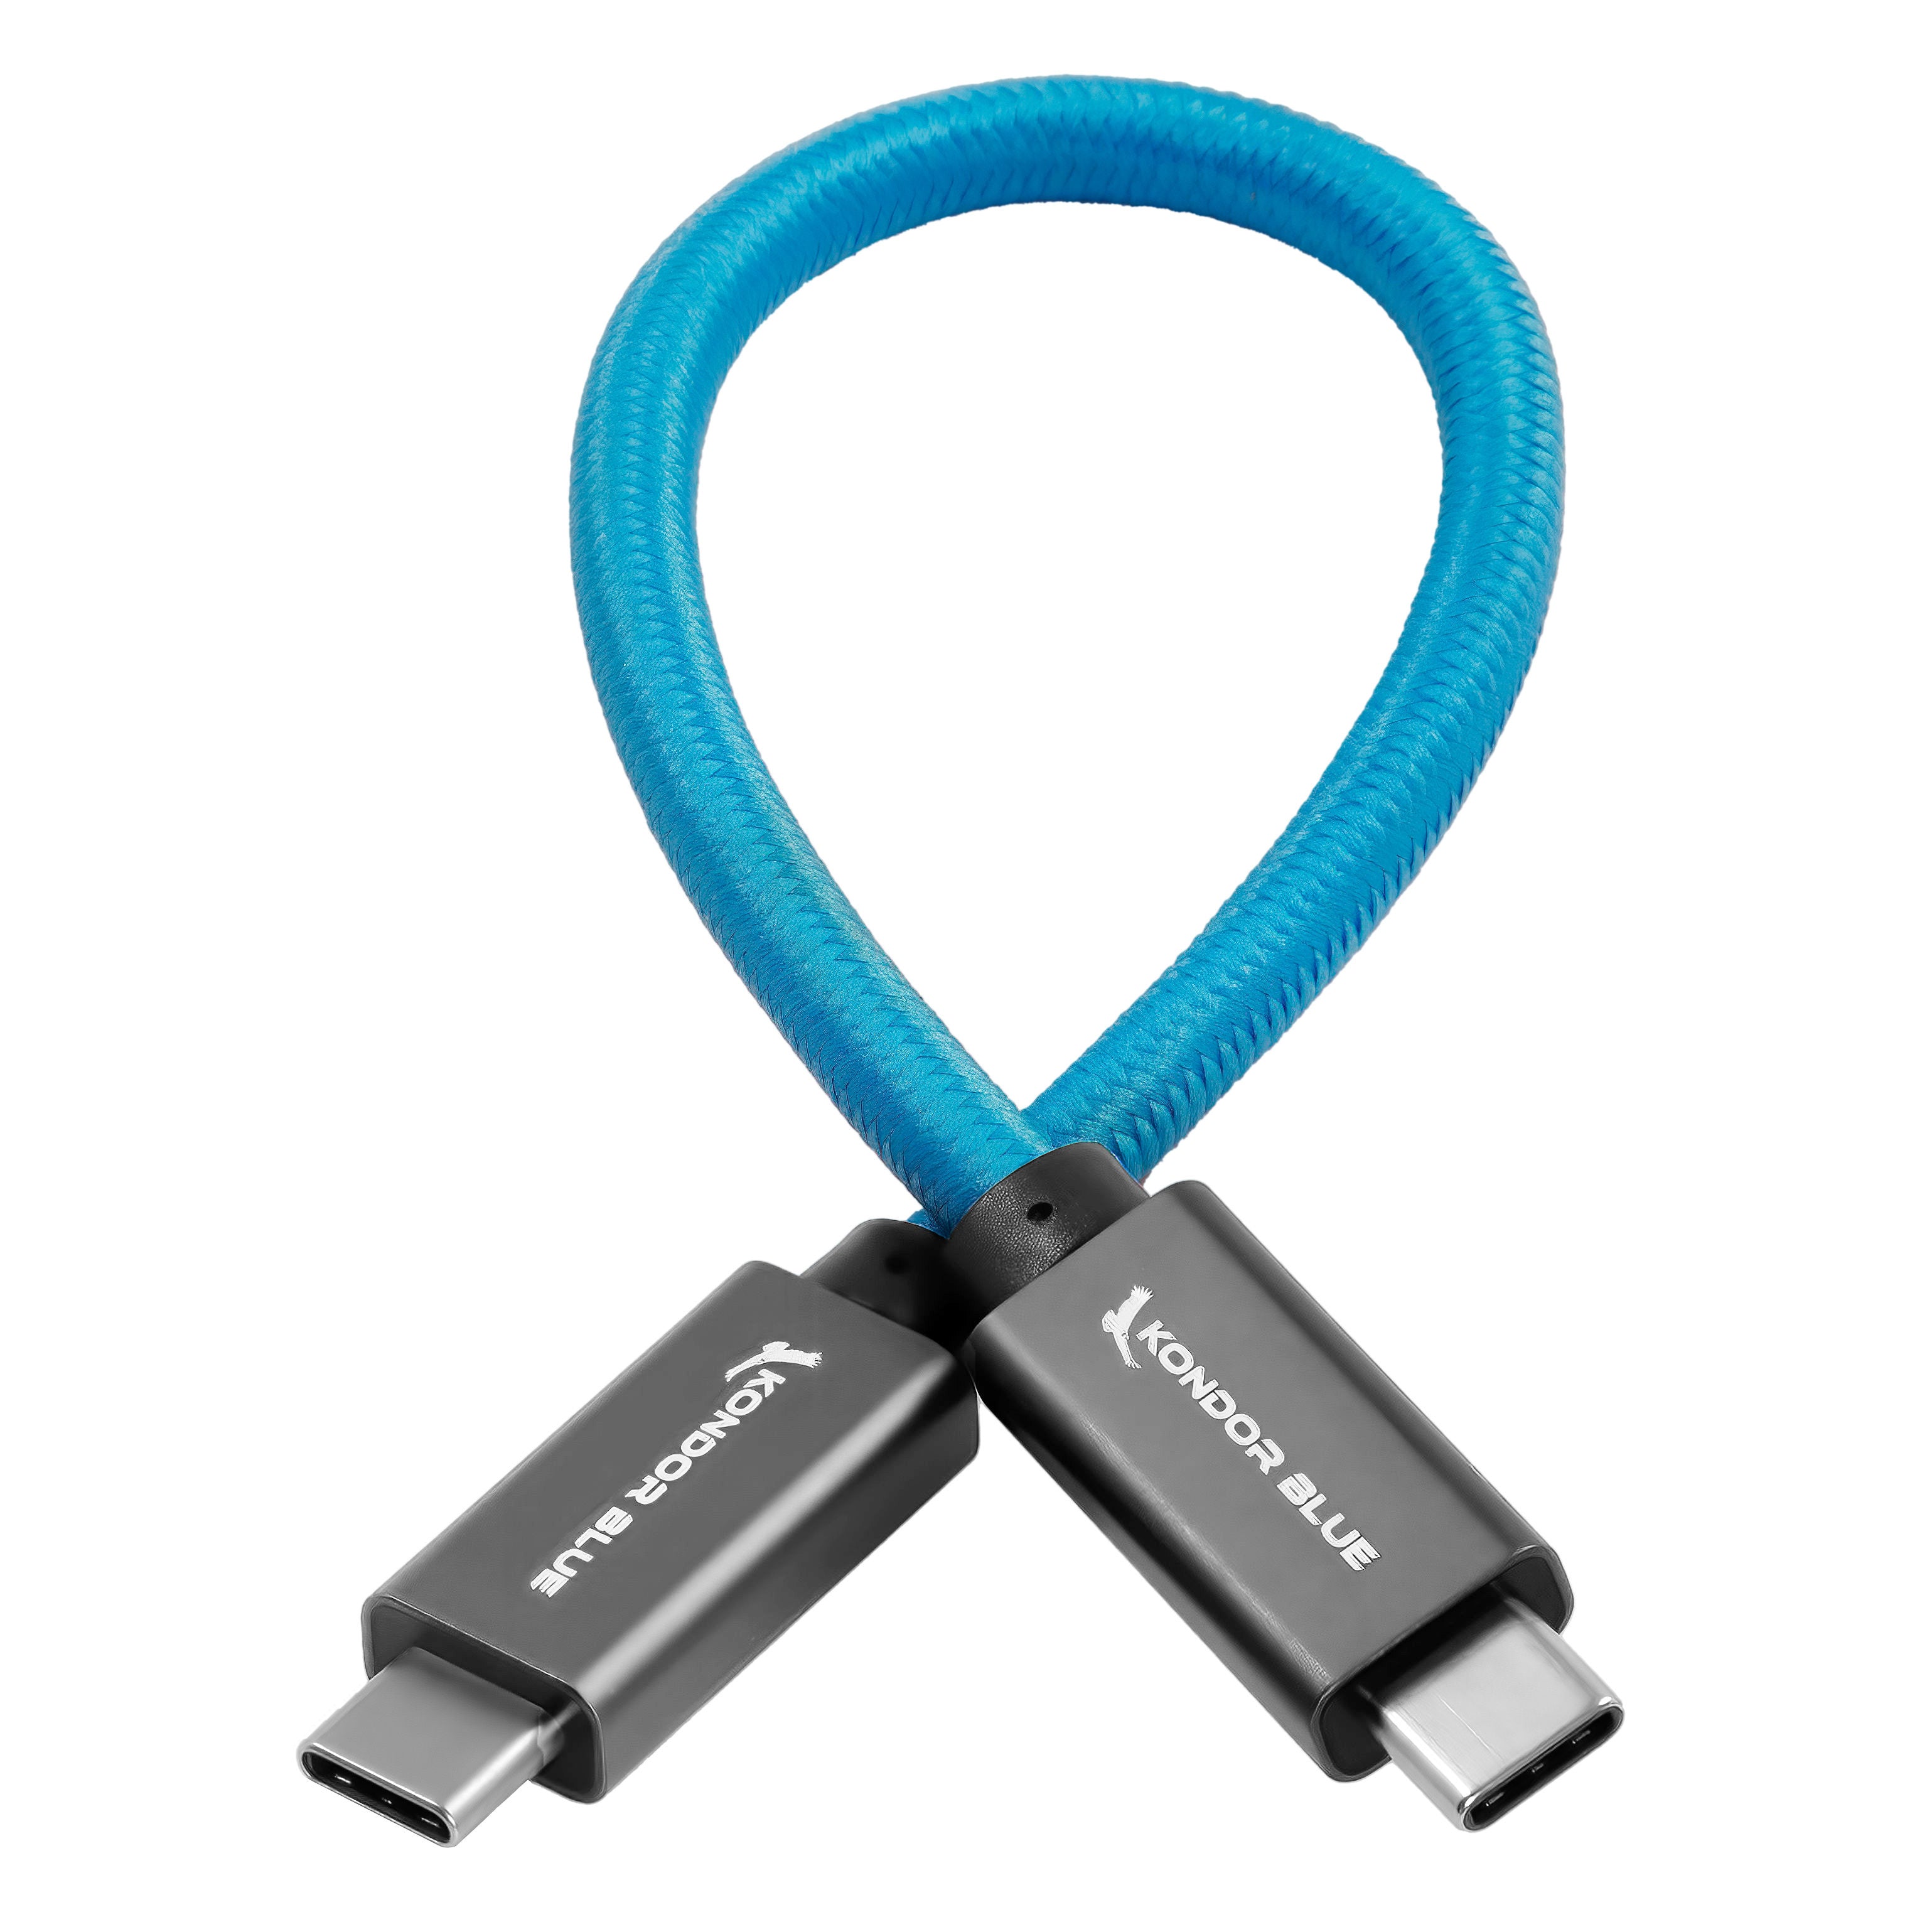 USB Type C Full Speed cable — Connective Peripherals - Global Store